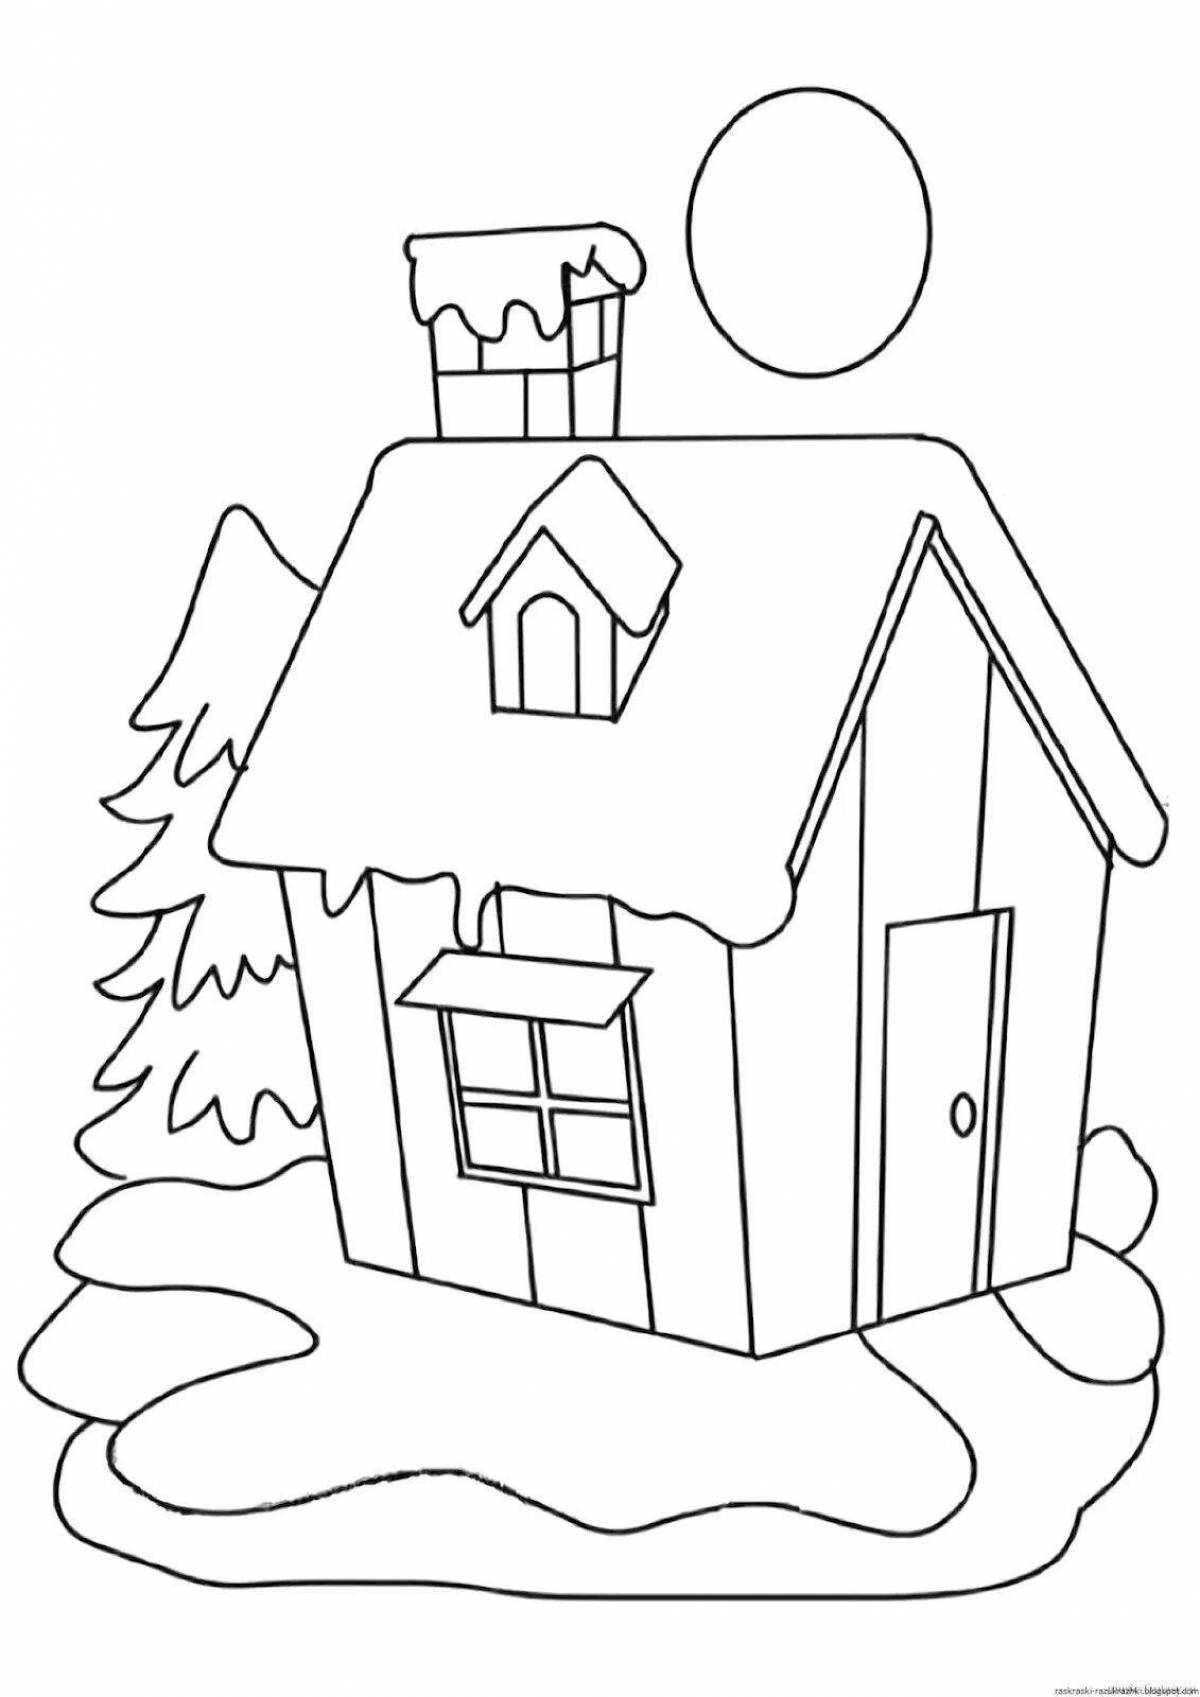 Coloring pages amazing house for kids 2 3